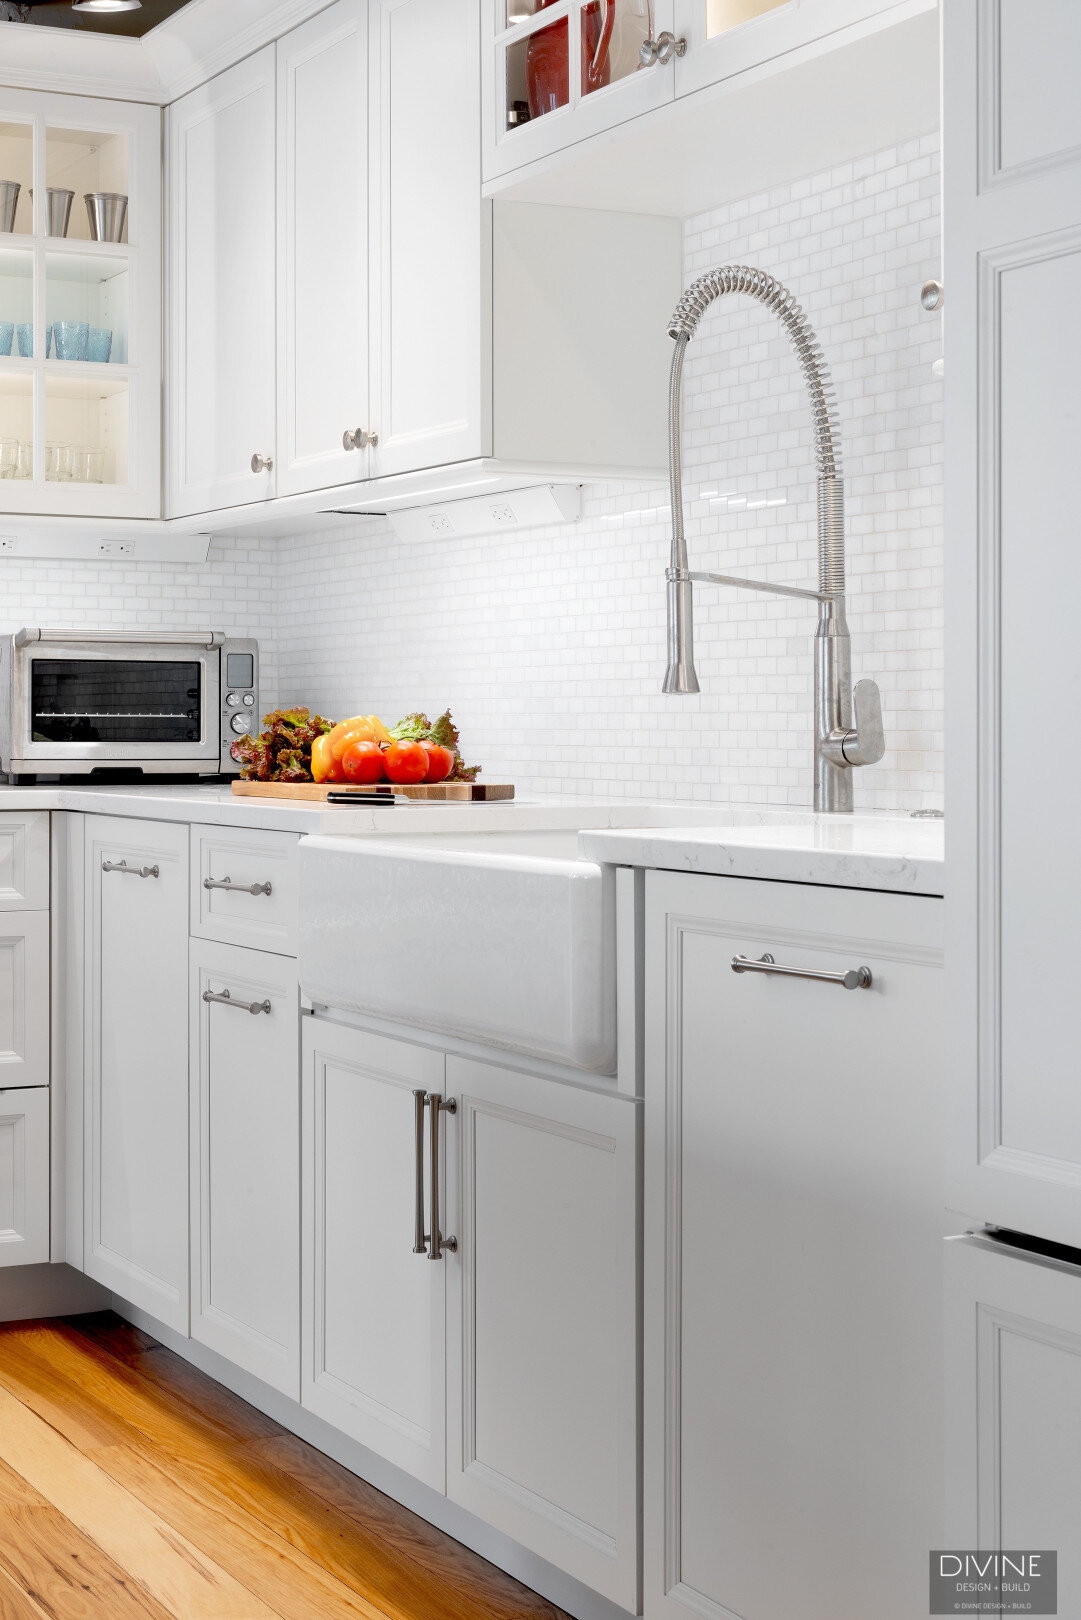 white, shaker style cabinets with brushed nickel accessories, white mosaic subway tile backsplash, cambria countertops with light marbling in grey tone and a paneled refrigerator